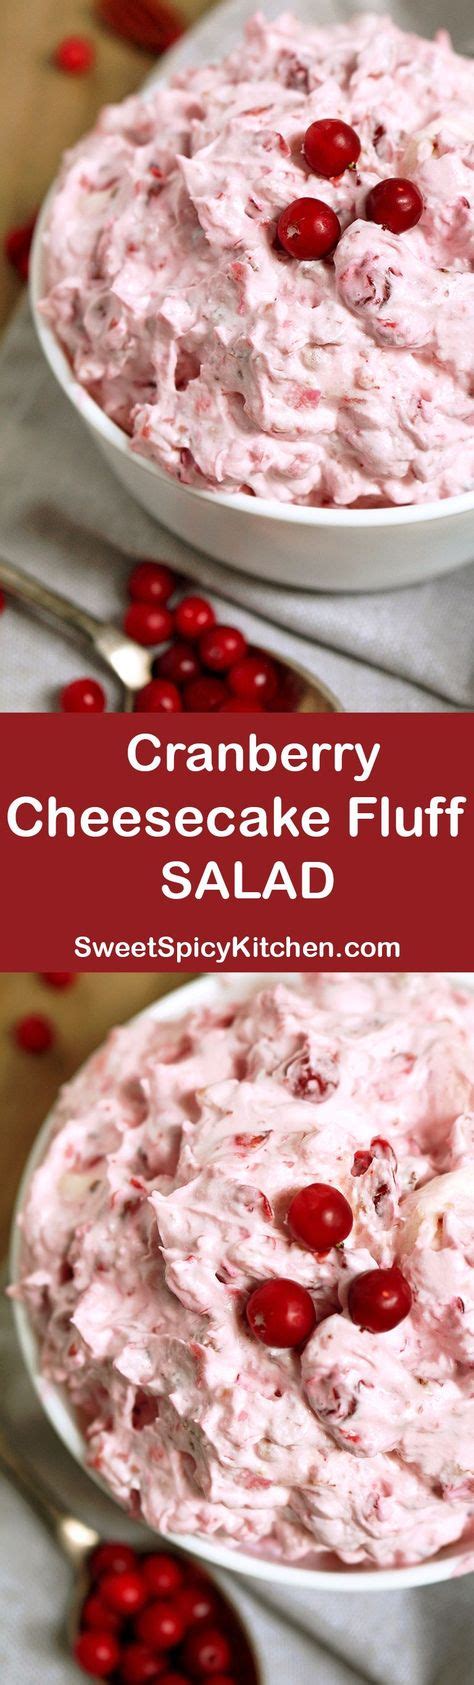 this salad is a perfect dessert for thanksgiving dinner or new year‘s